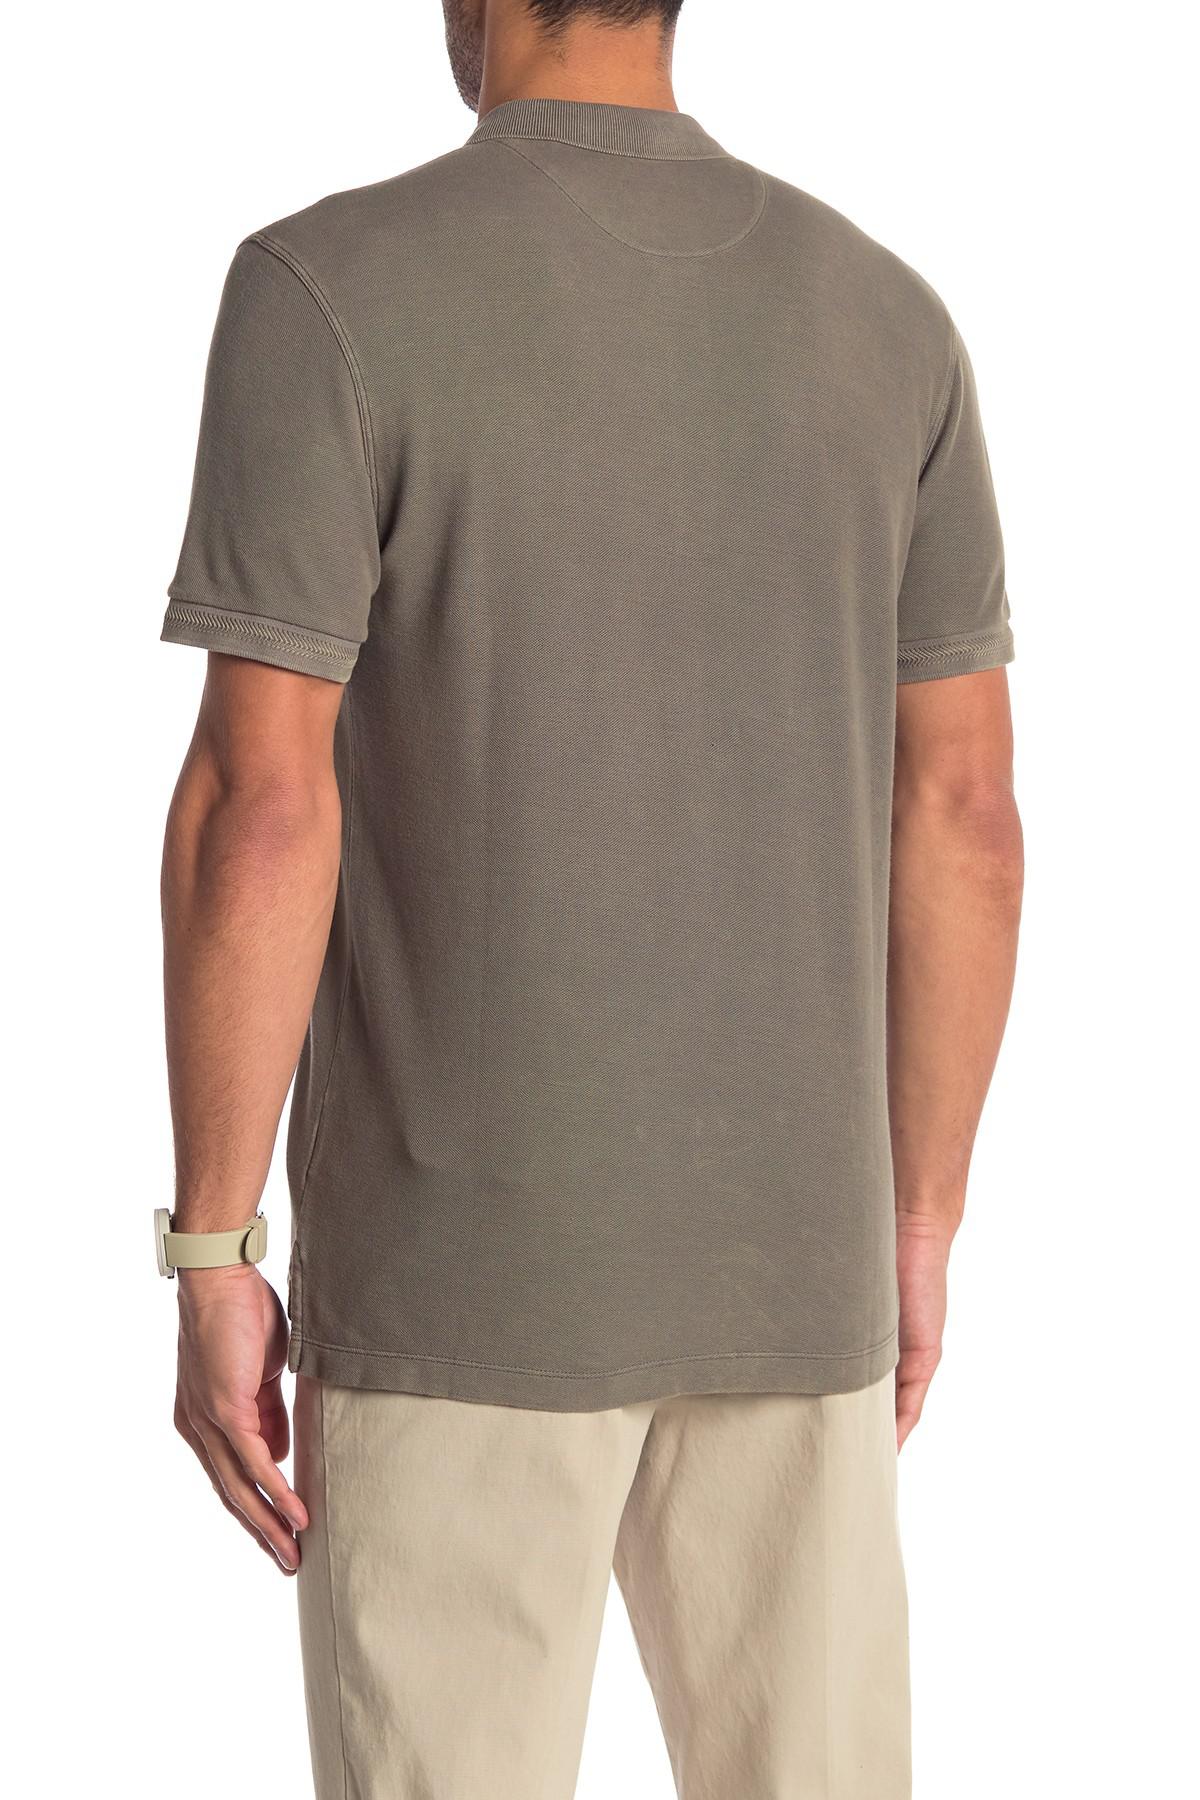 ATM Cotton Pique Short Sleeve Polo in Gray for Men - Lyst